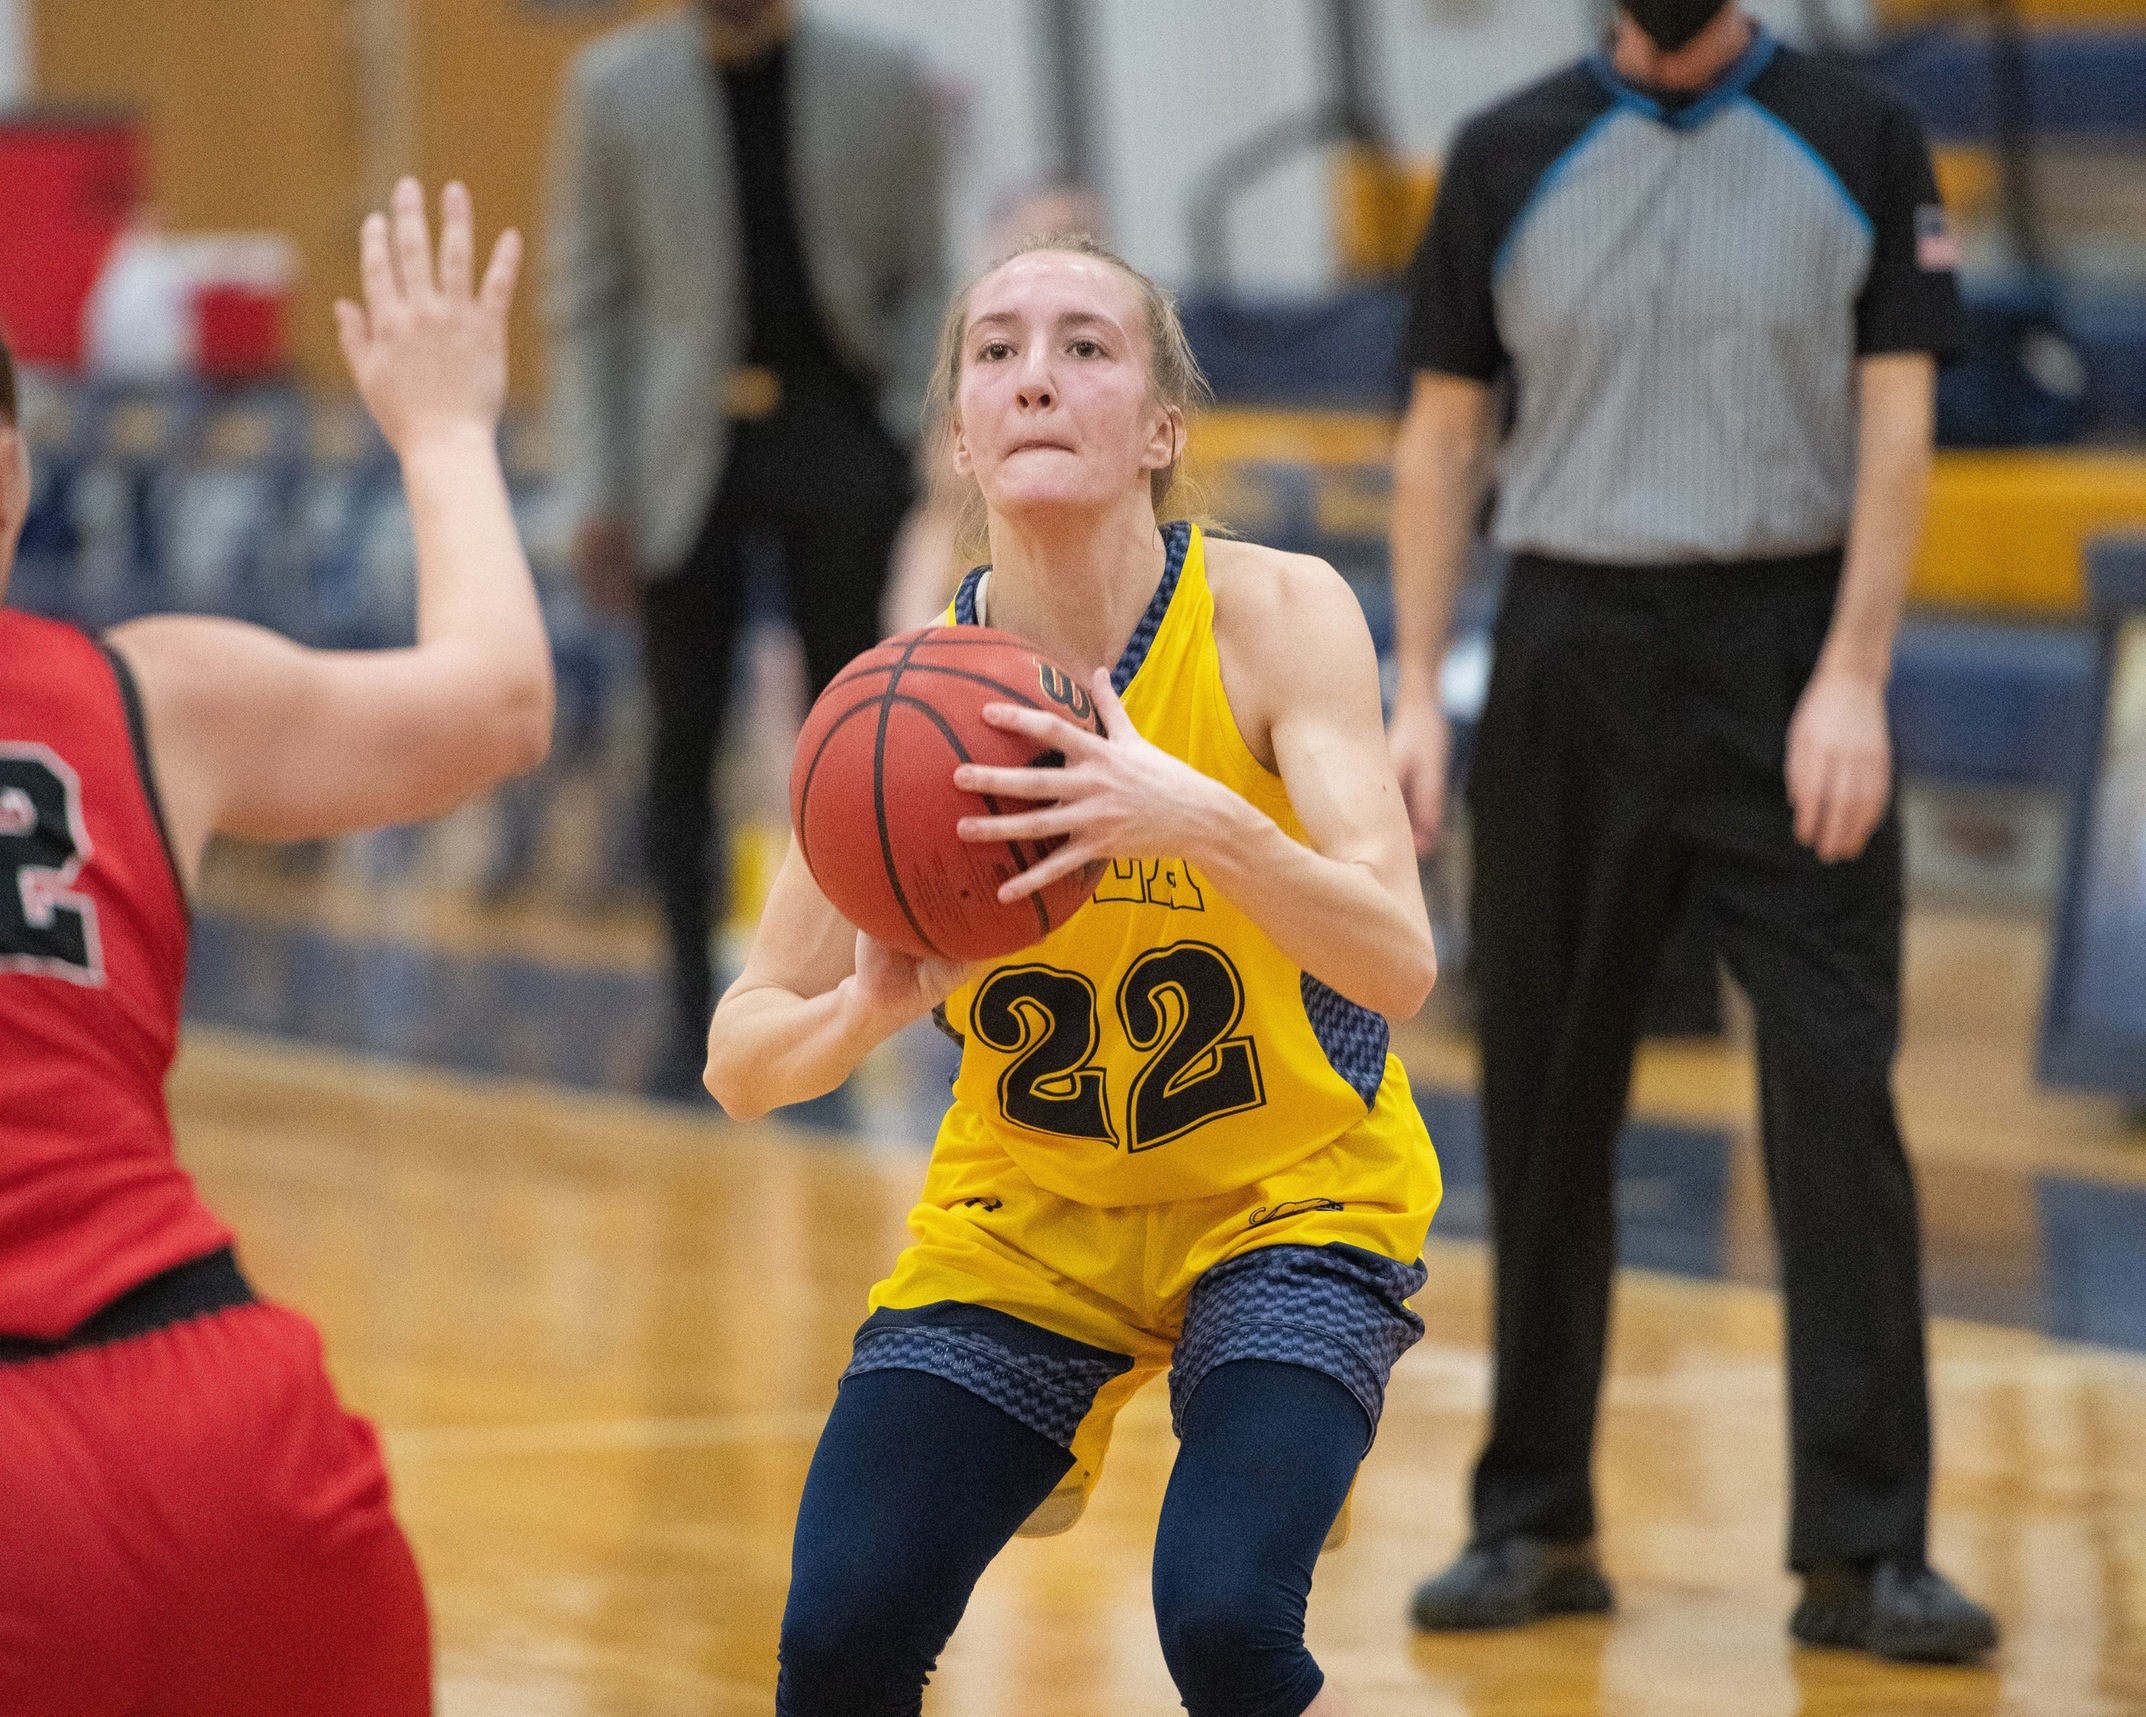 Women's Basketball downed by Bears